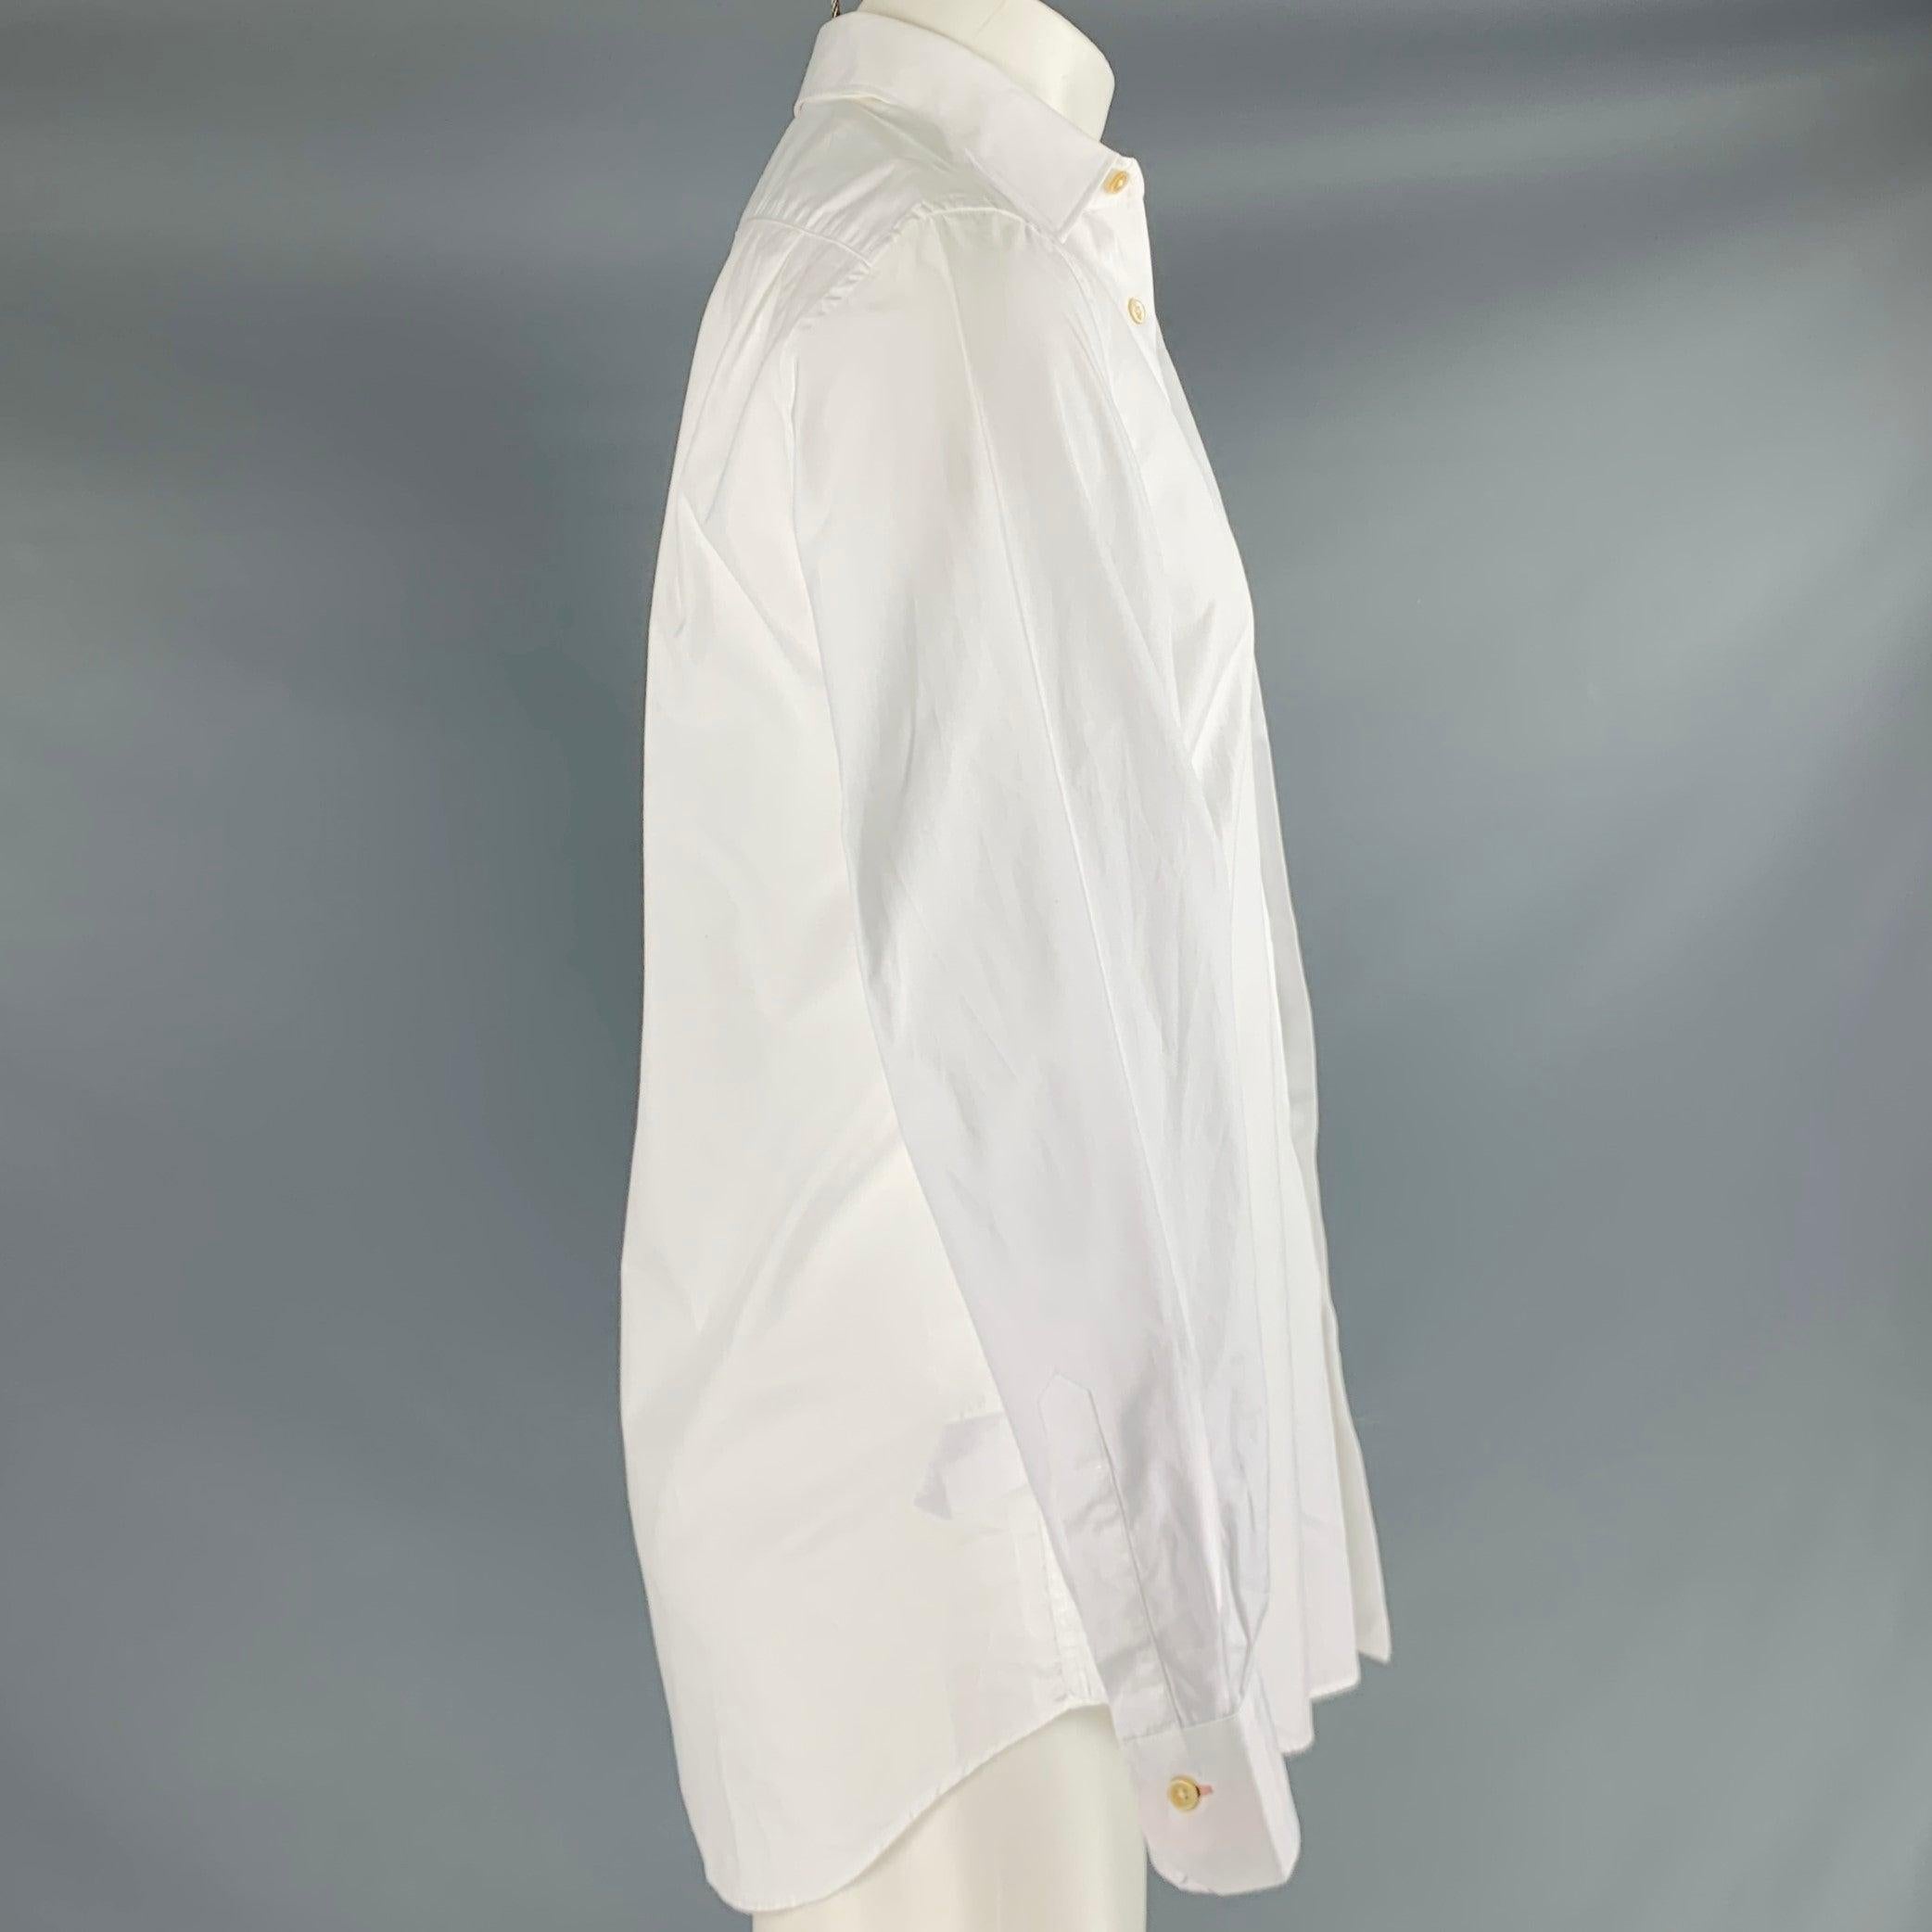 PAUL SMITH long sleeve shirt
in a white cotton blend fabric featuring a classic fit, spread collar, and button closure. Made in Italy.Excellent Pre-Owned Condition. 

Marked:   15